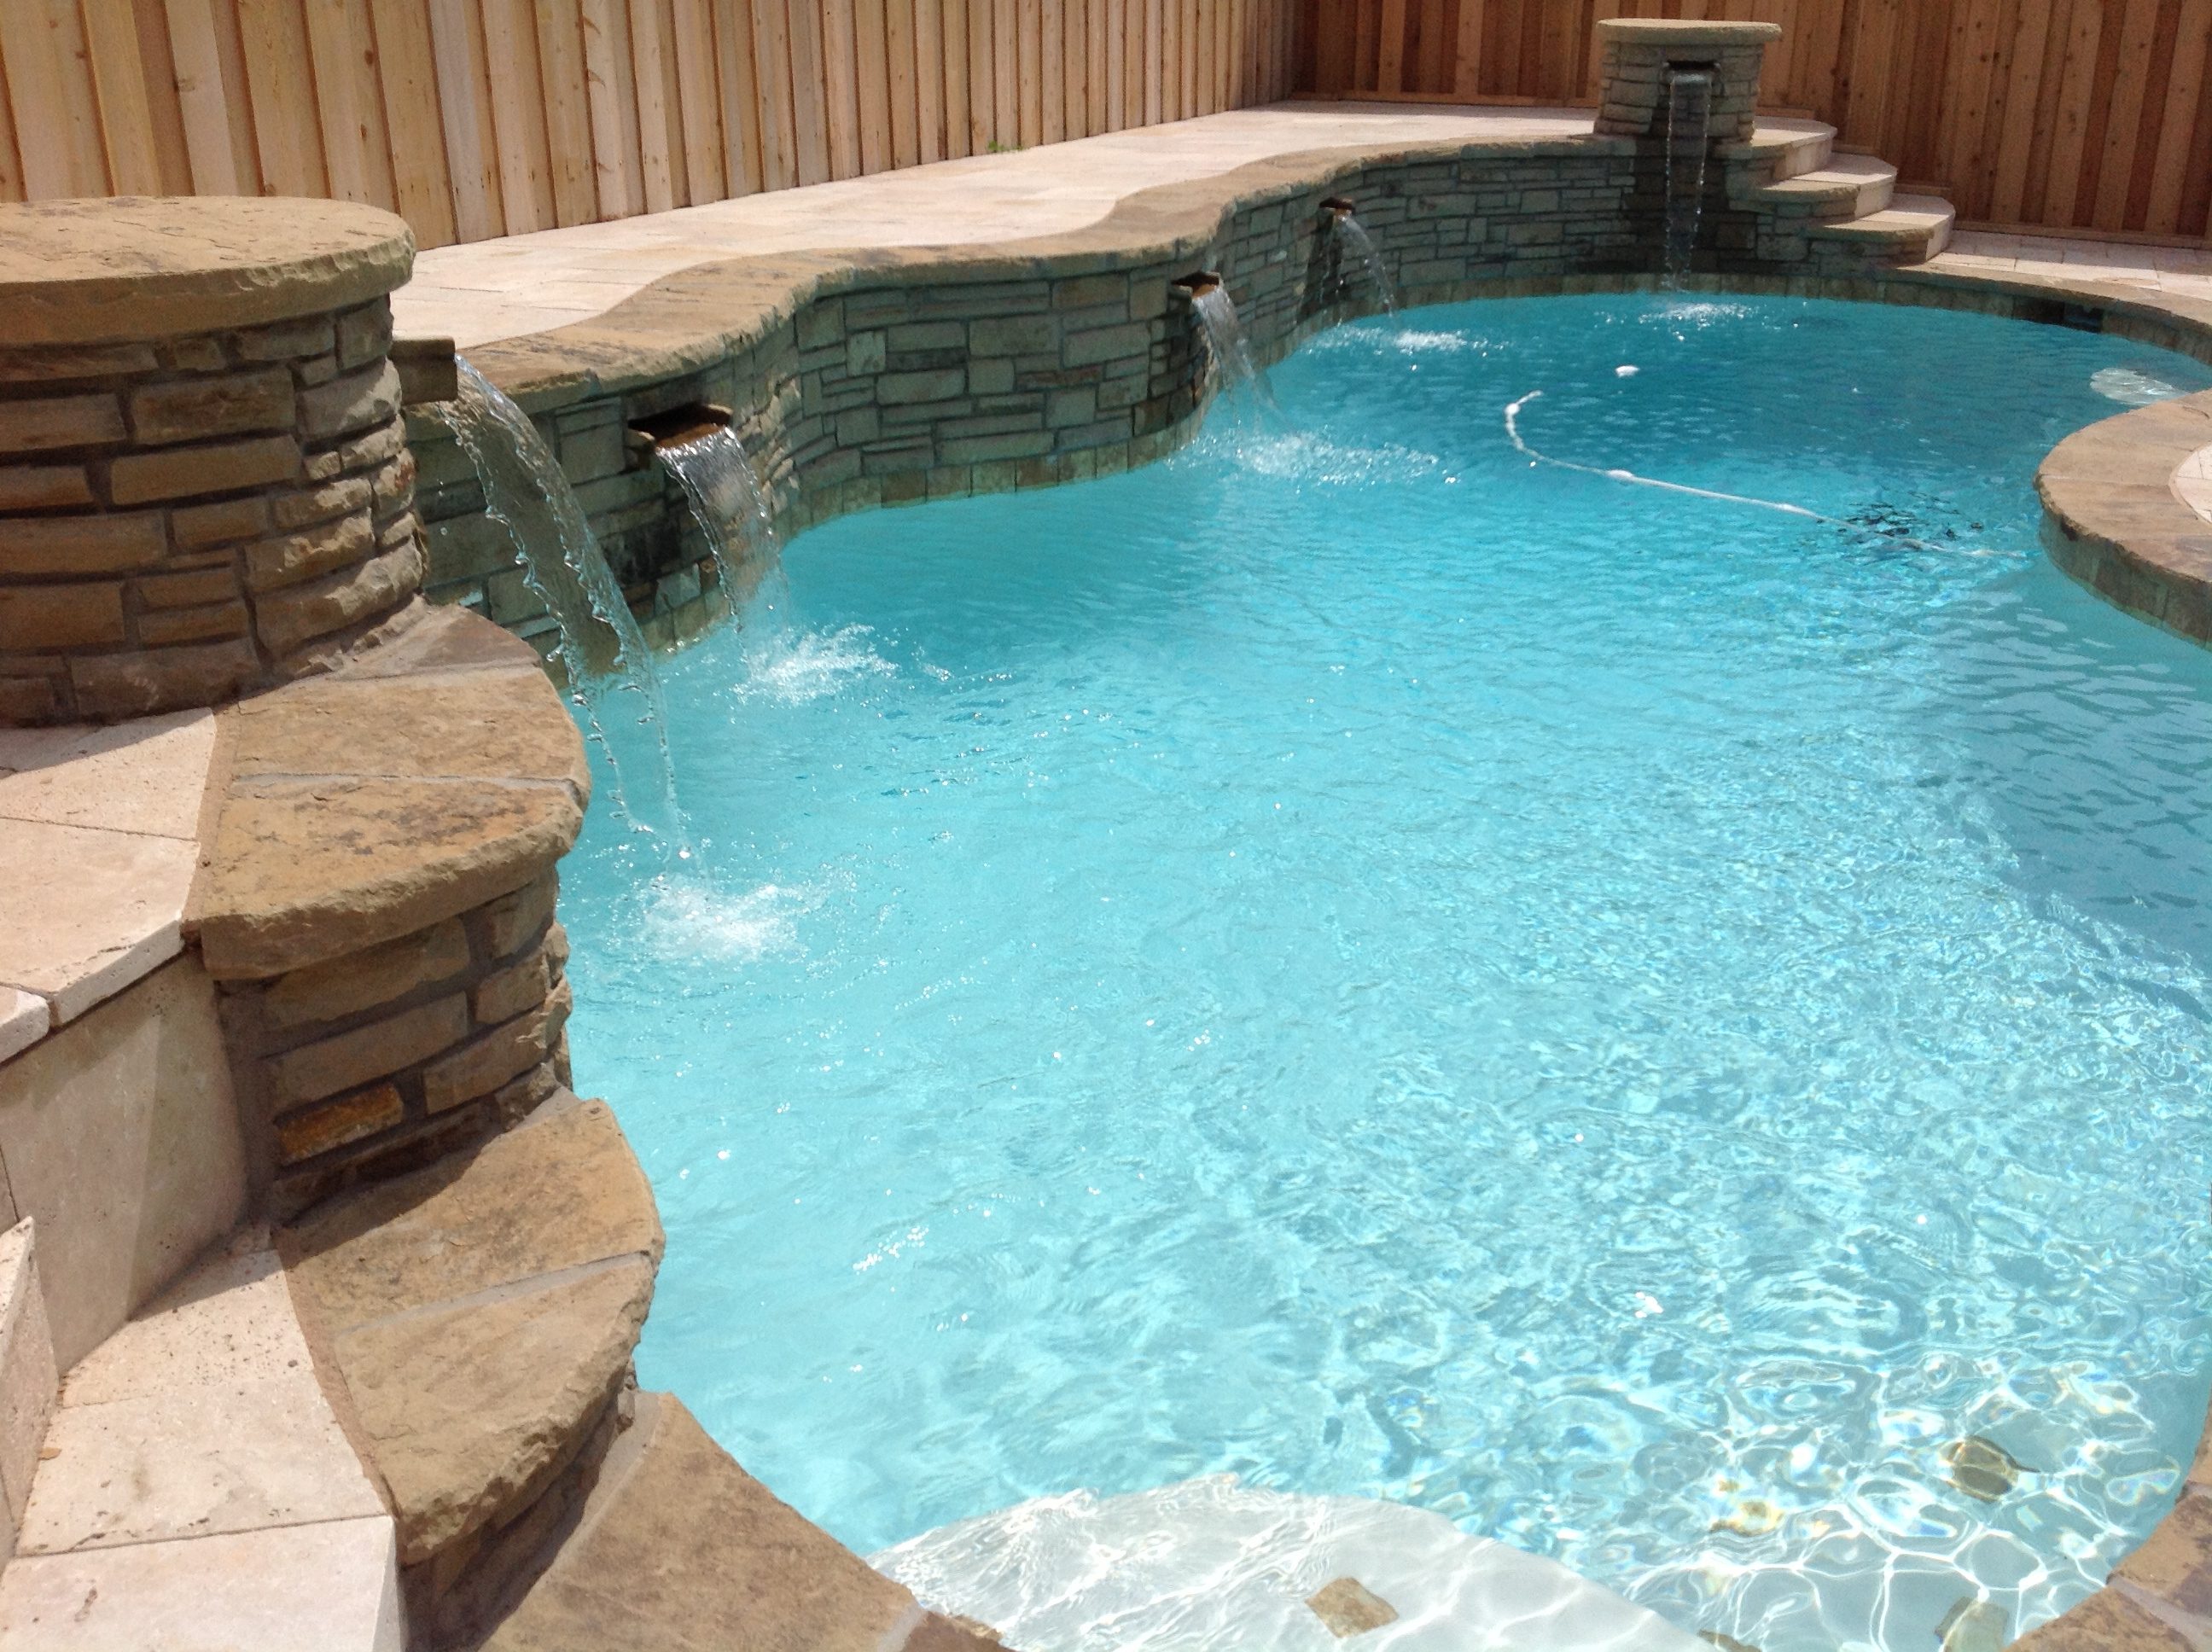 A pool with water falling into it and rocks on the side.